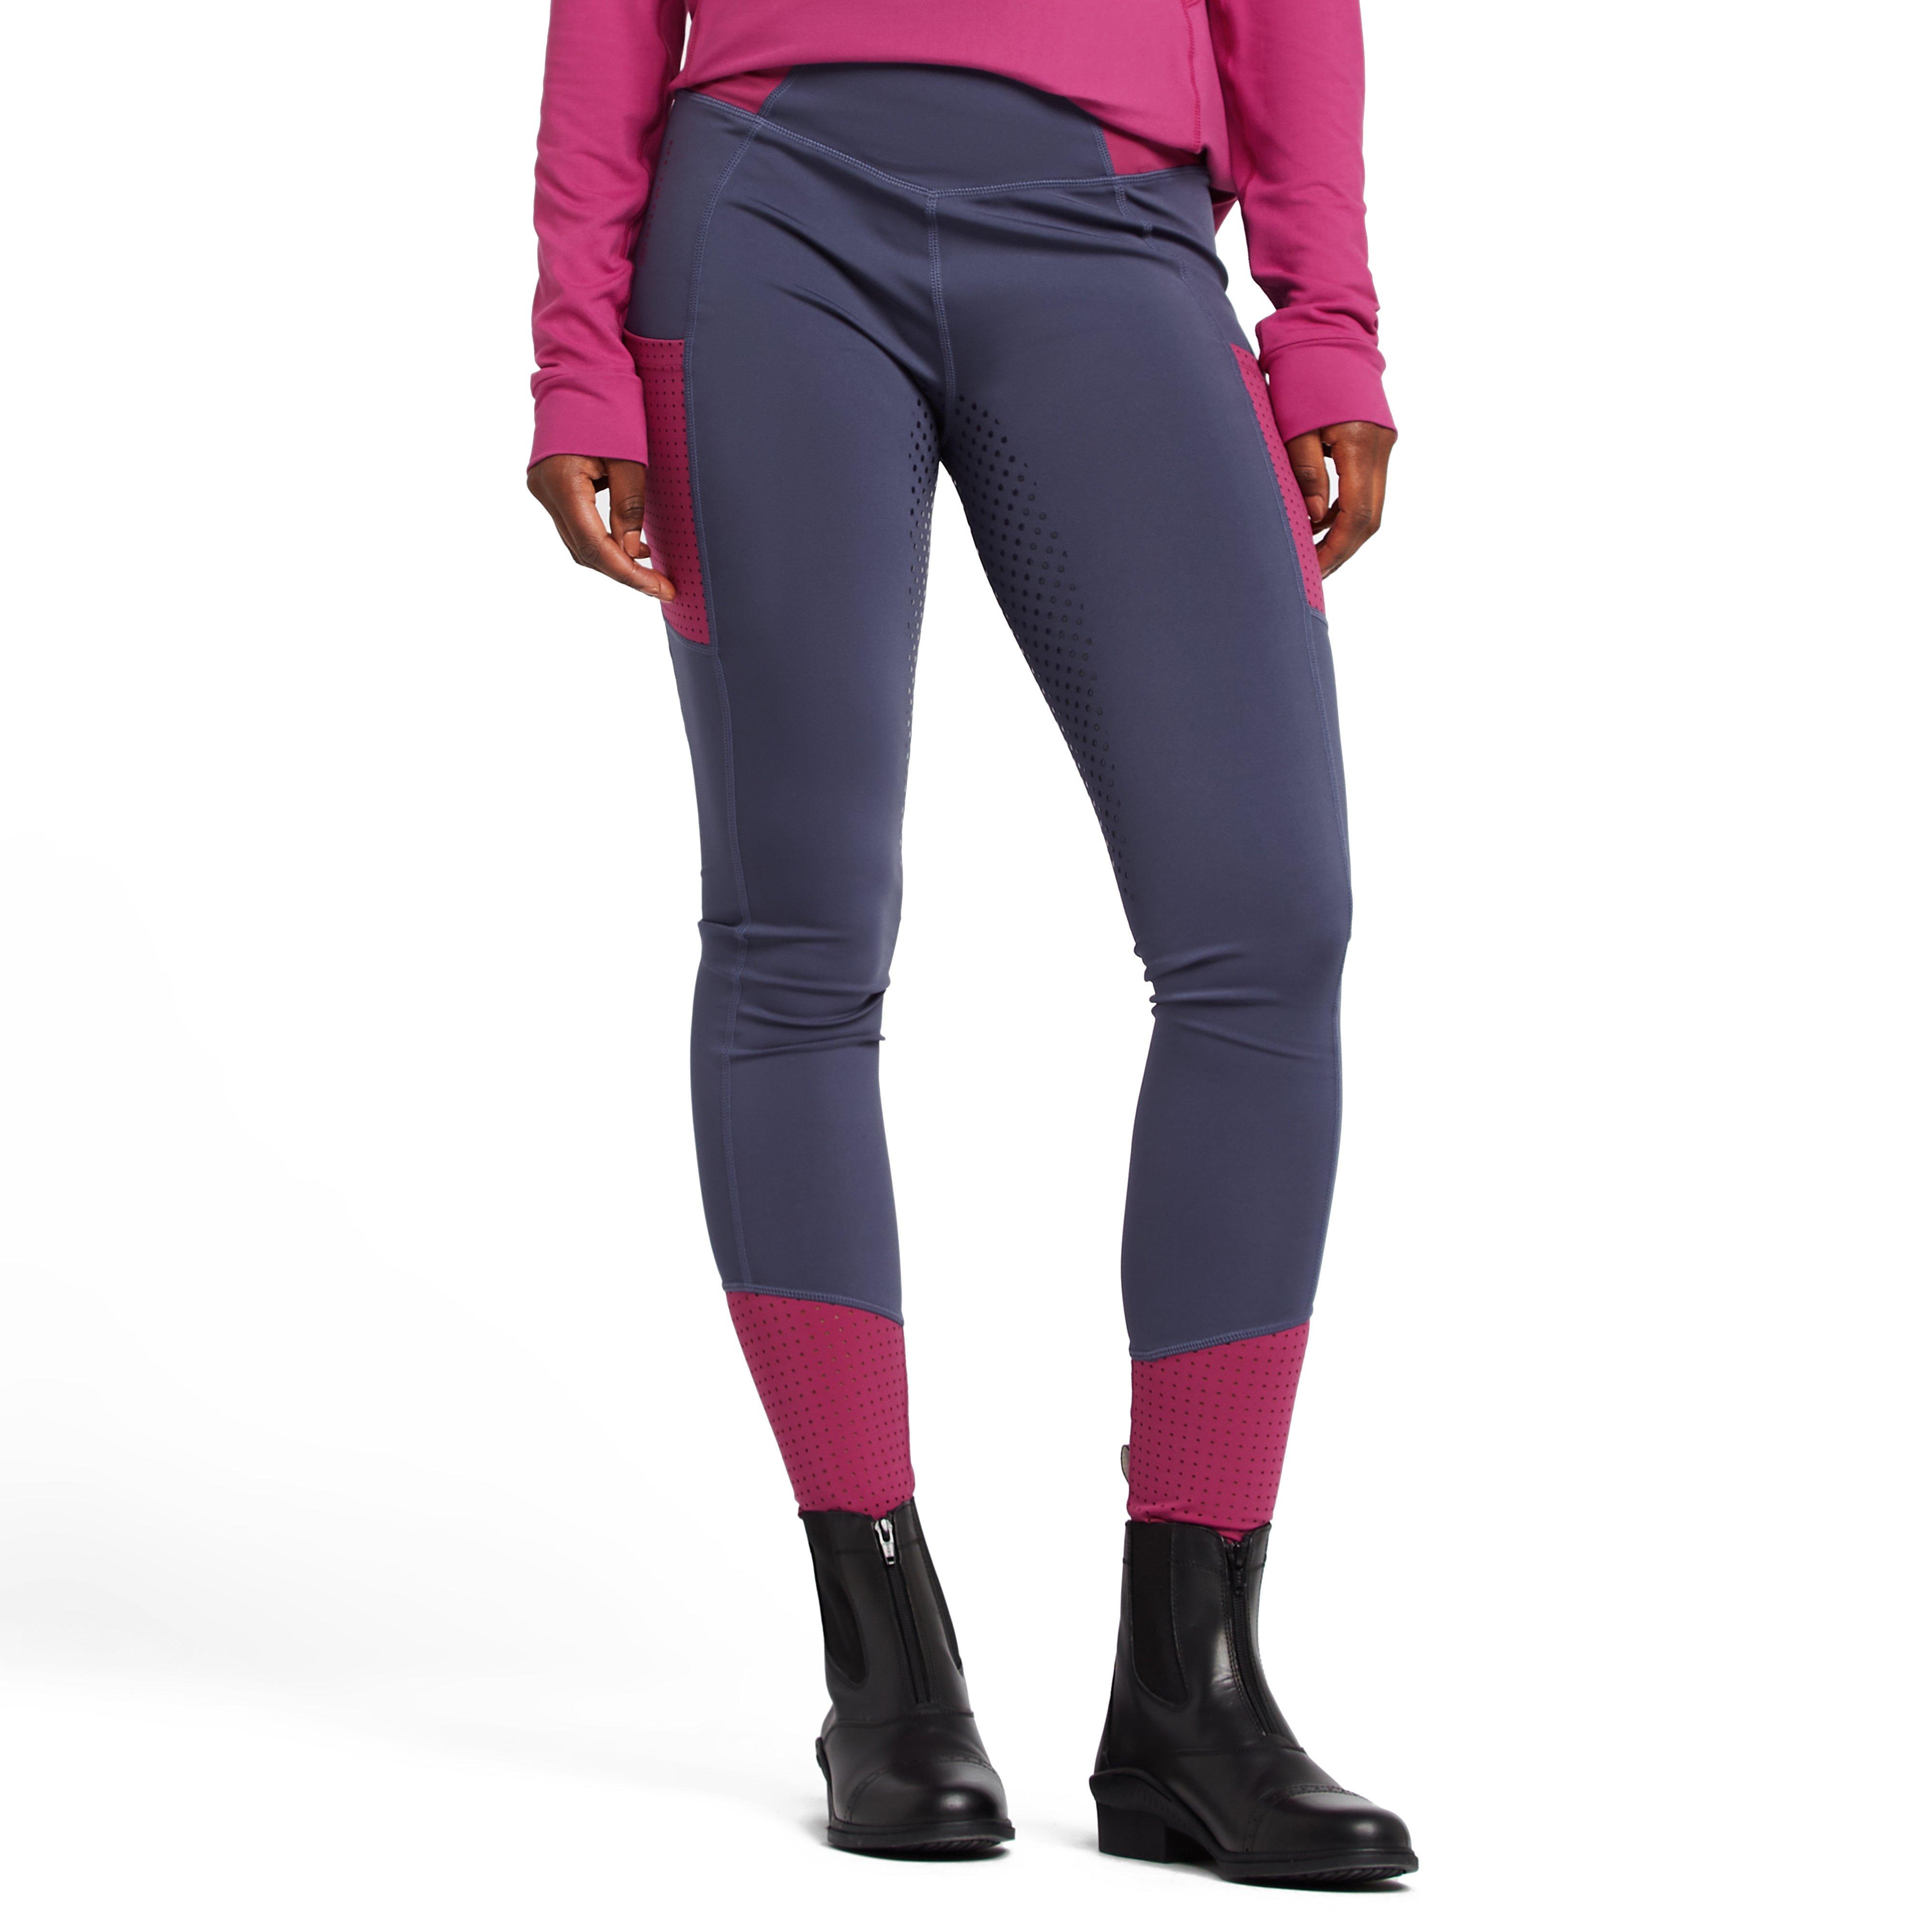 Womens Power Tech Colour Block Full Grip Training Tights Red Violet